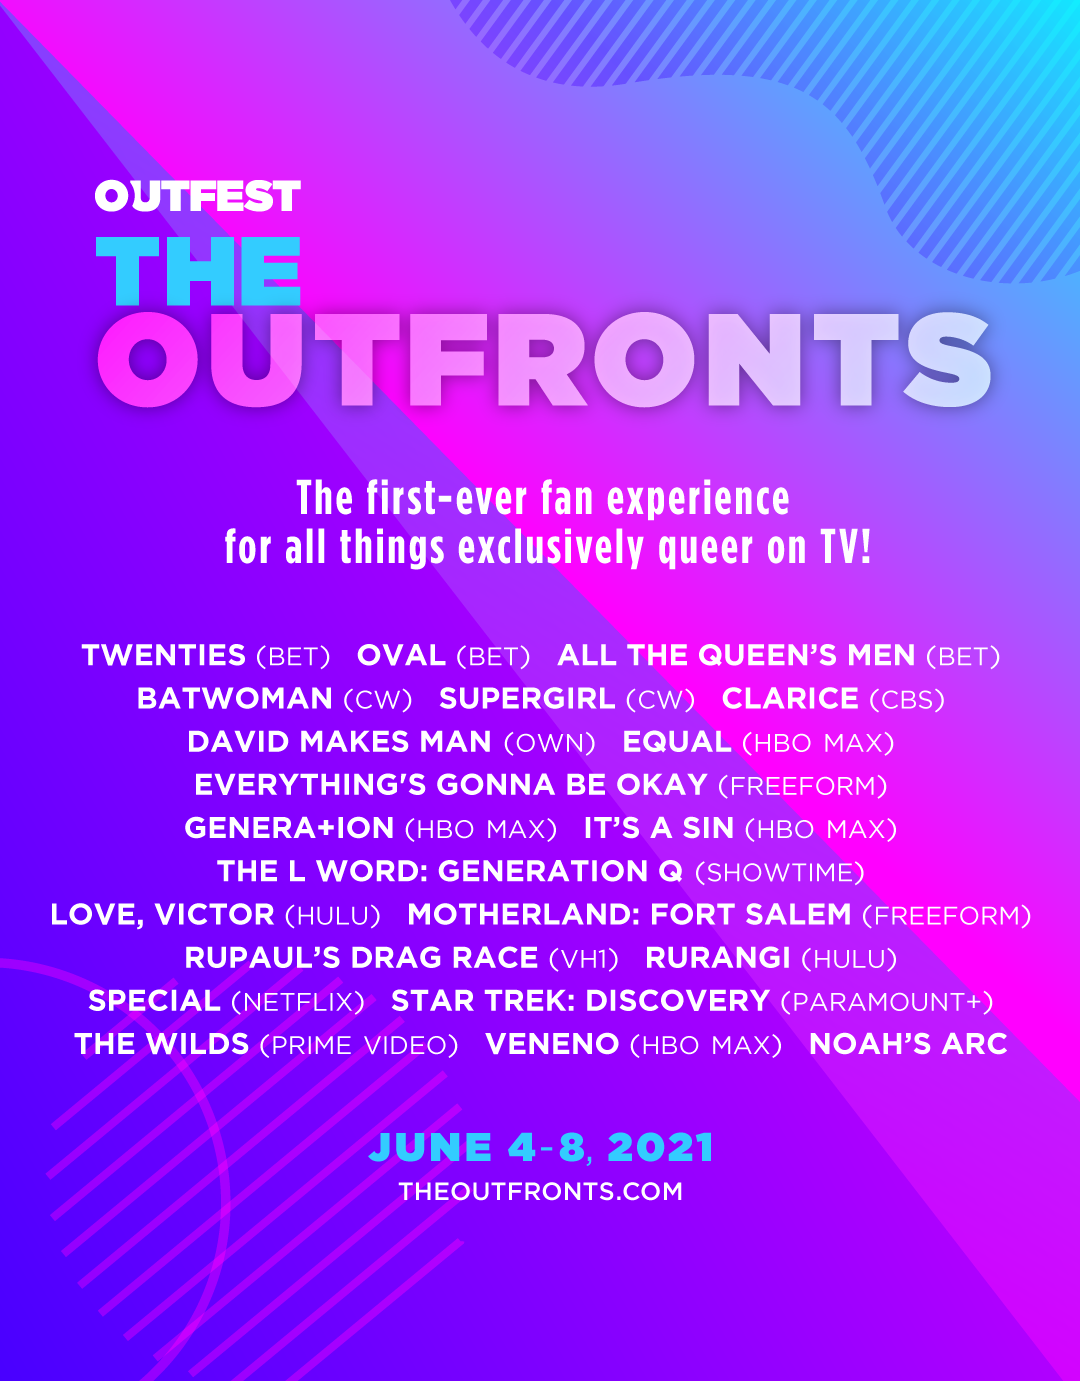 The Outfronts